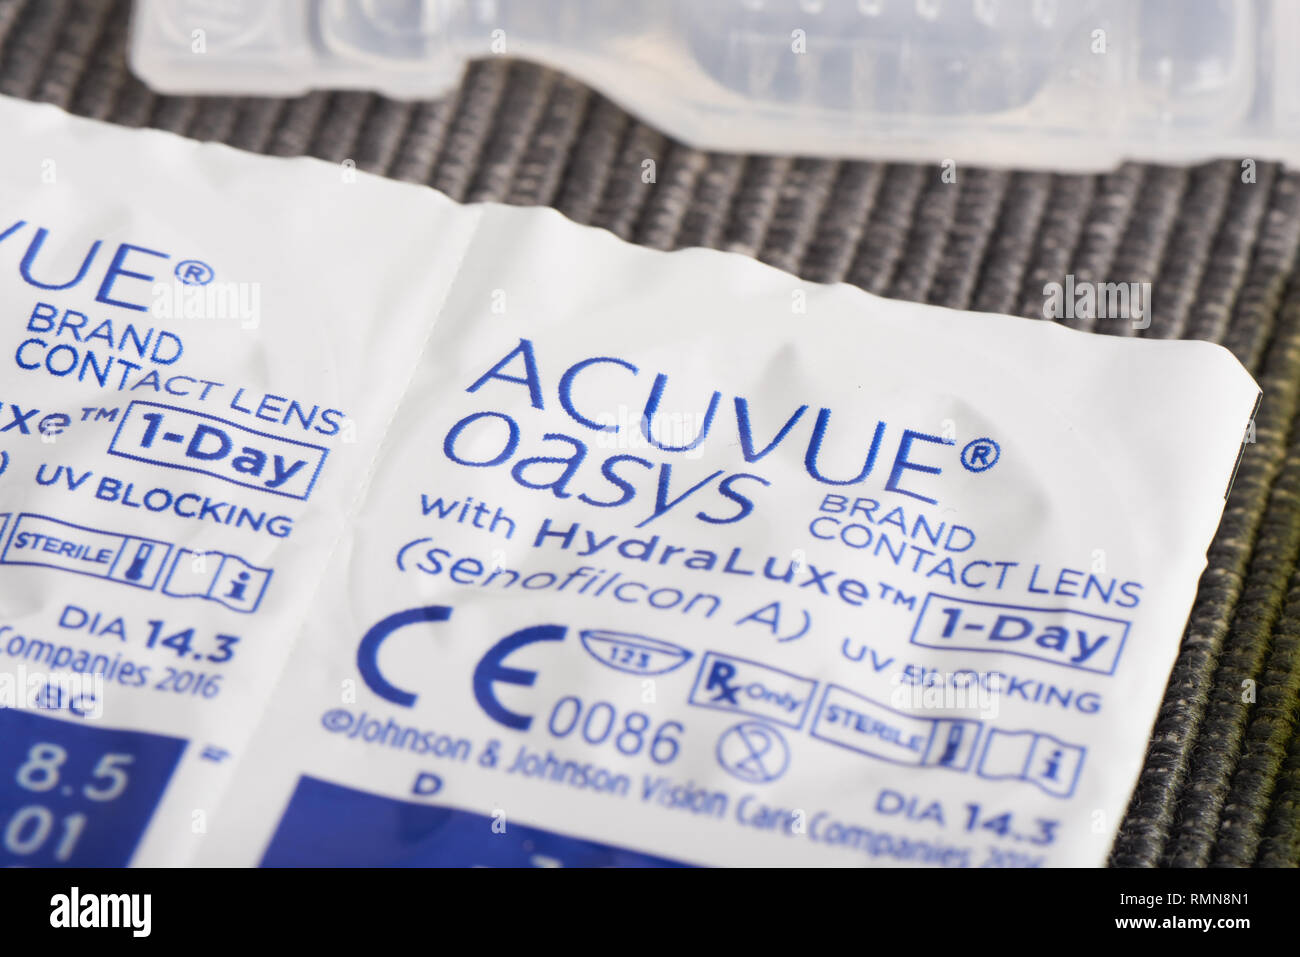 Gimpo, Korea - December 6, 2018: Johnson & Johnson Vision Care Acuvue Oasys contact lens, daily disposable silicone hydrogel released in July 2016. Stock Photo